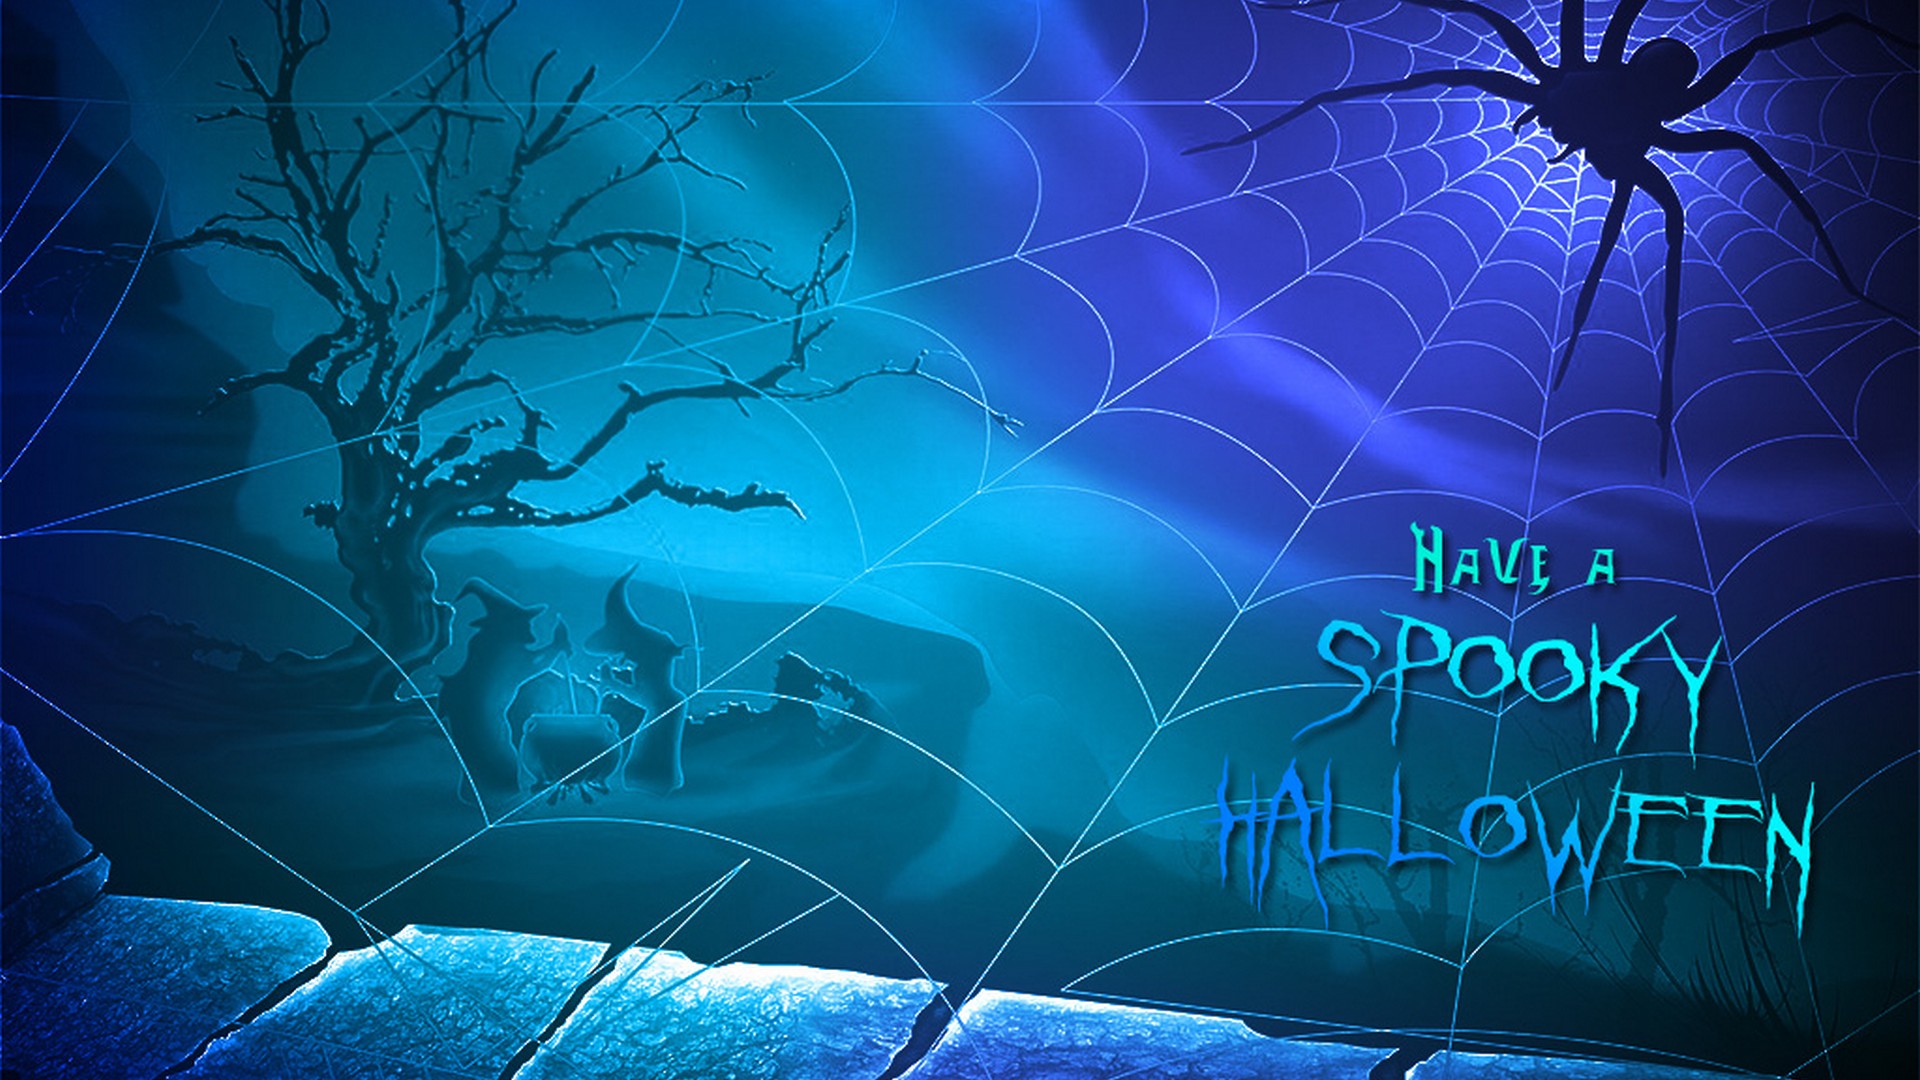 Desktop Wallpaper Halloween With high-resolution 1920X1080 pixel. You can use this wallpaper for your Windows and Mac OS computers as well as your Android and iPhone smartphones